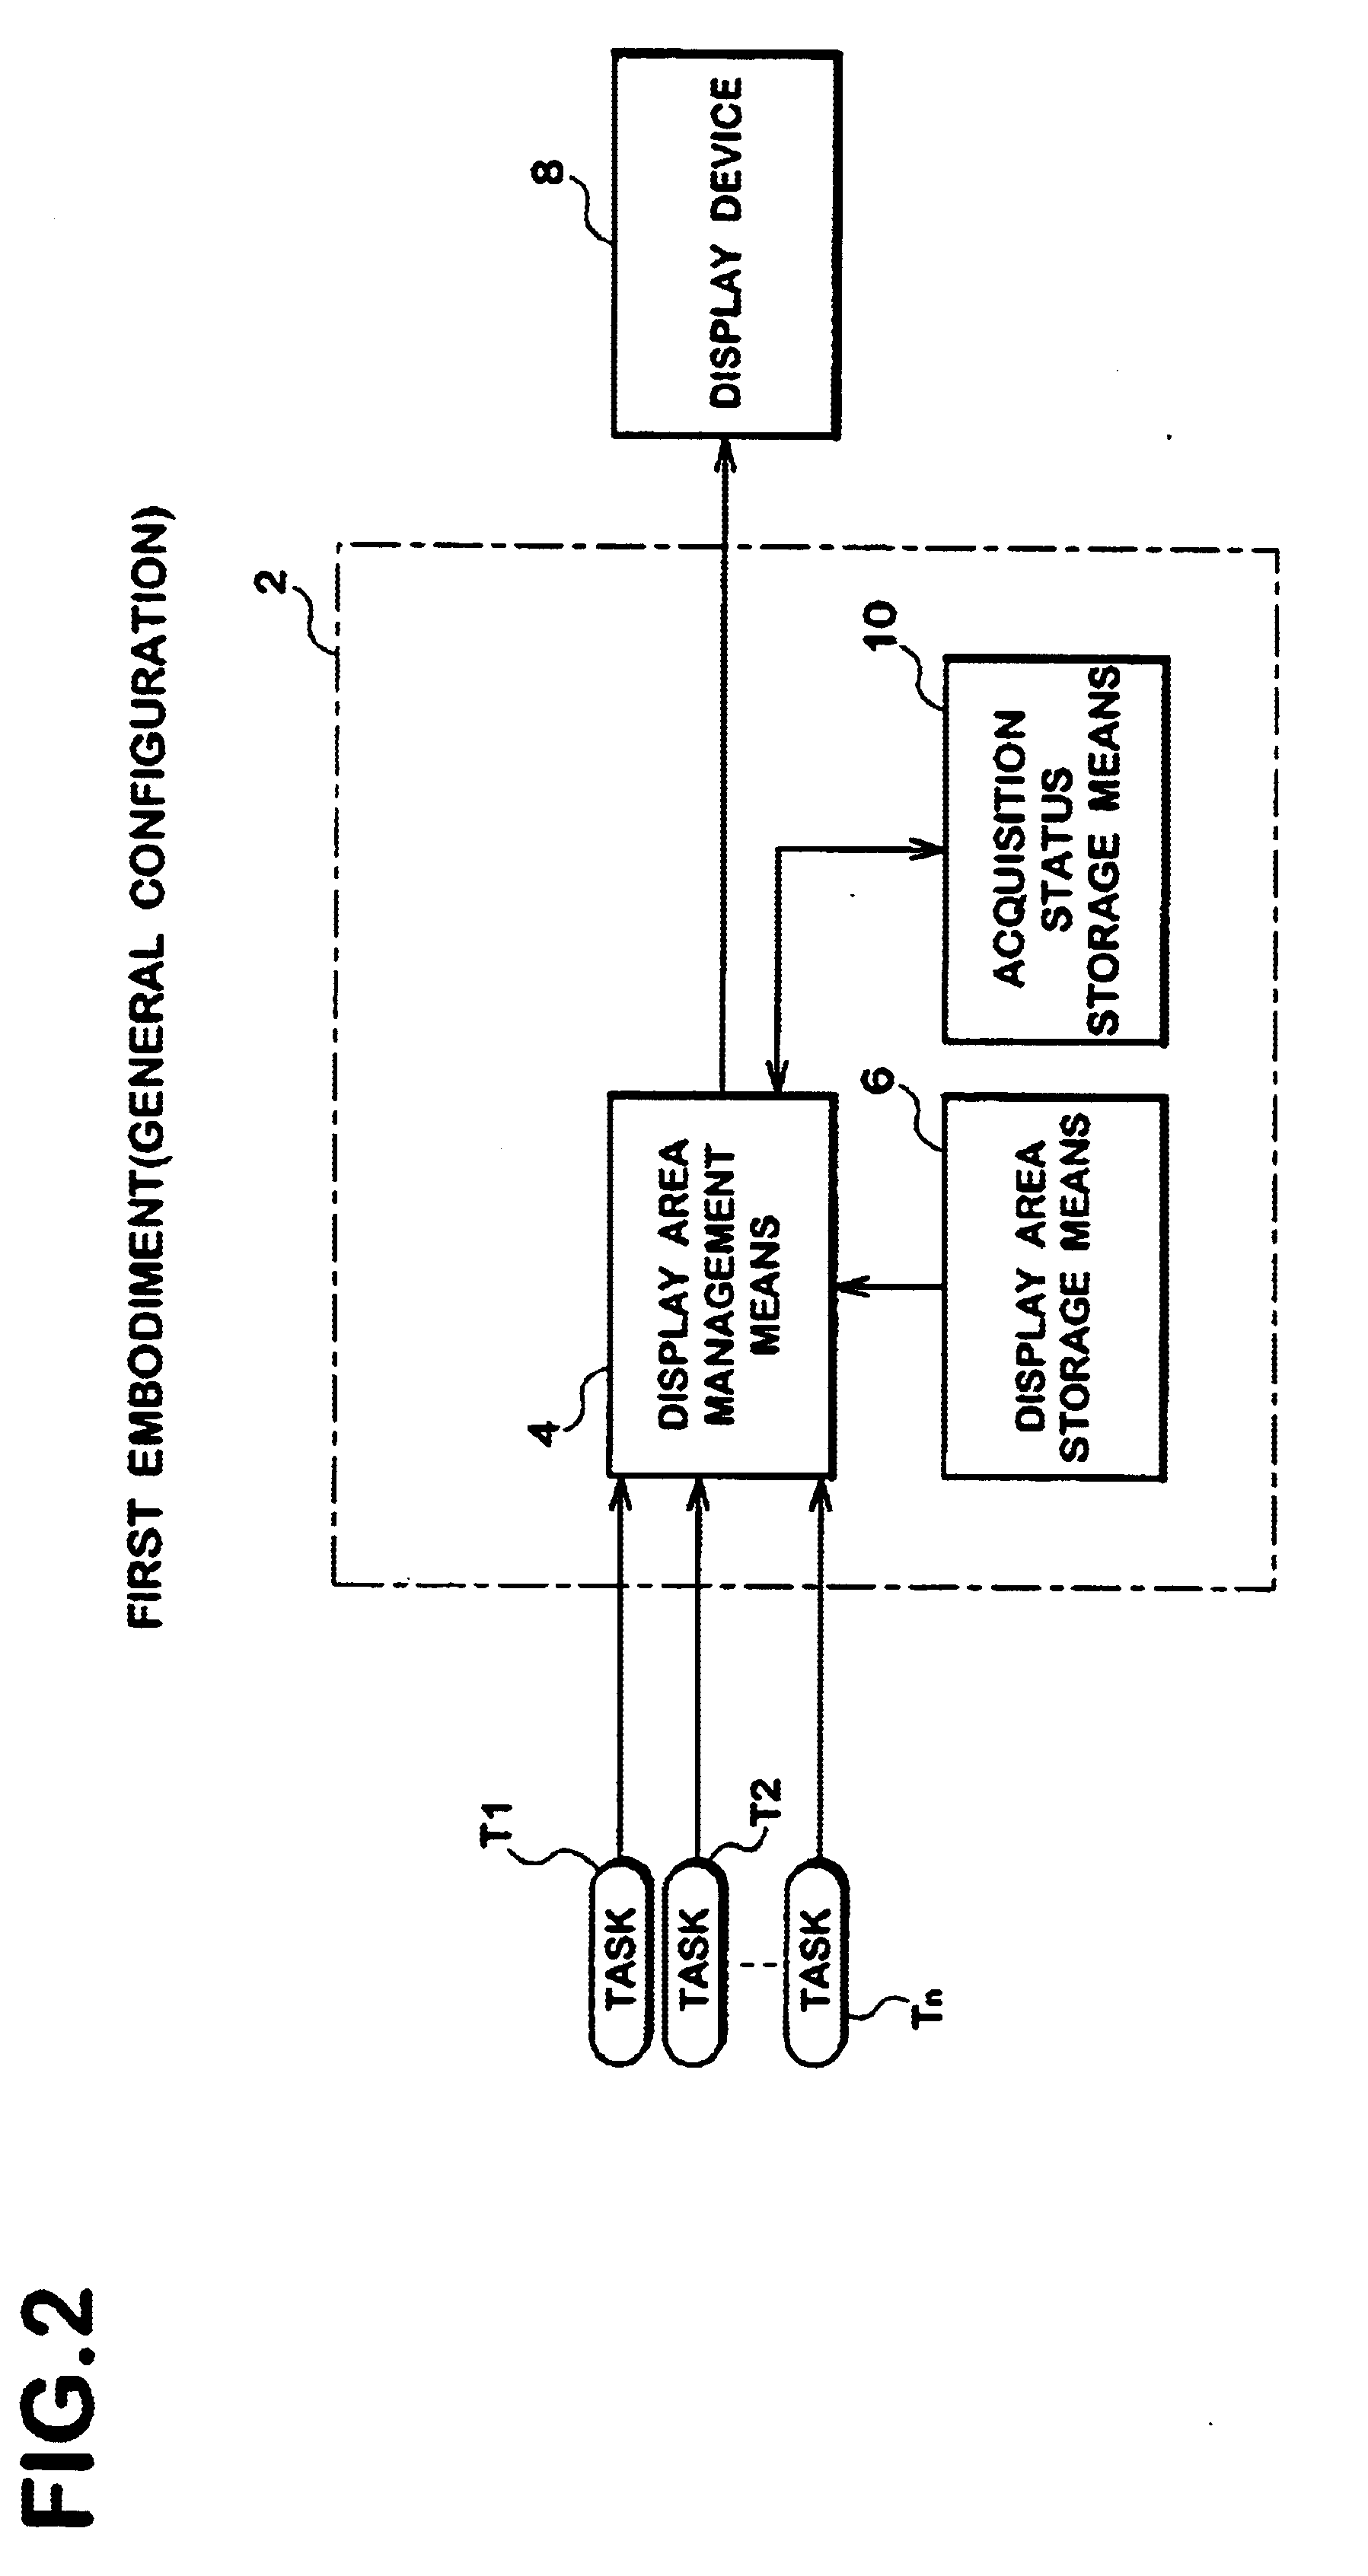 Device and method for authorizing use of a pre-coded display area